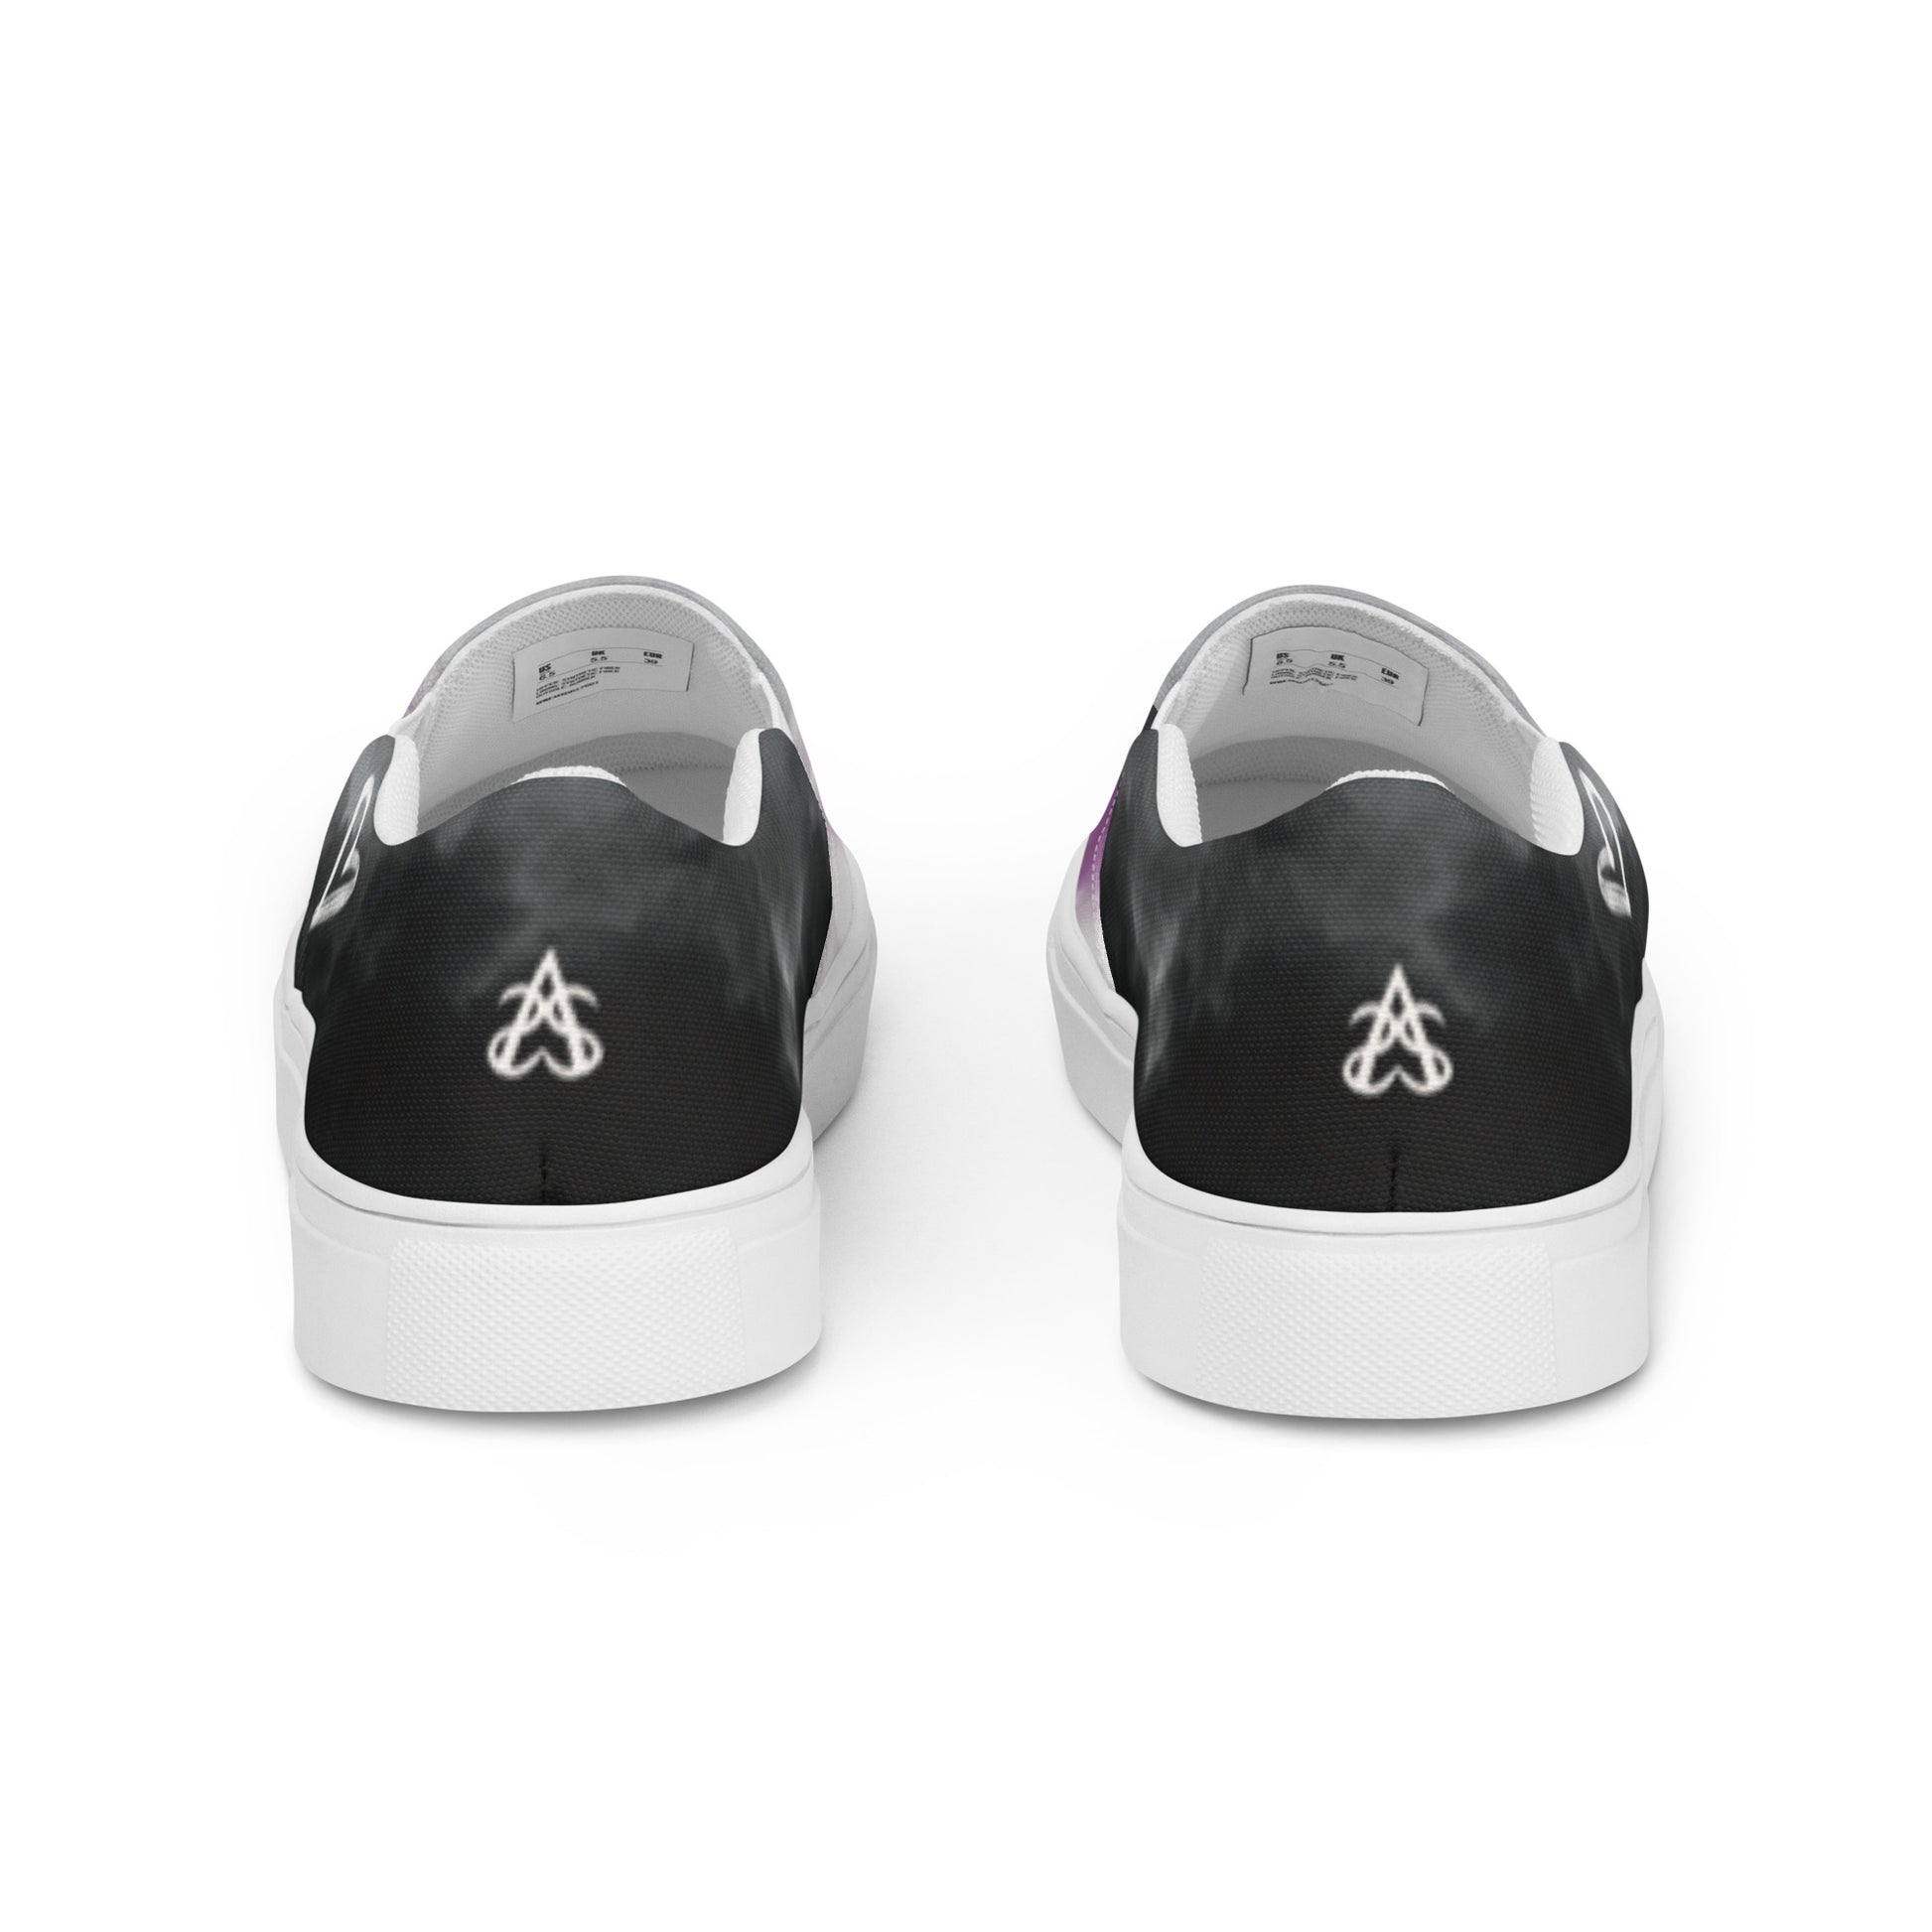 Back view: A pair of slip-on shoes with clouds in the asexual flag colors, a hand drawn white heart on the side, and the Aras Sivad Studio logo on the back.